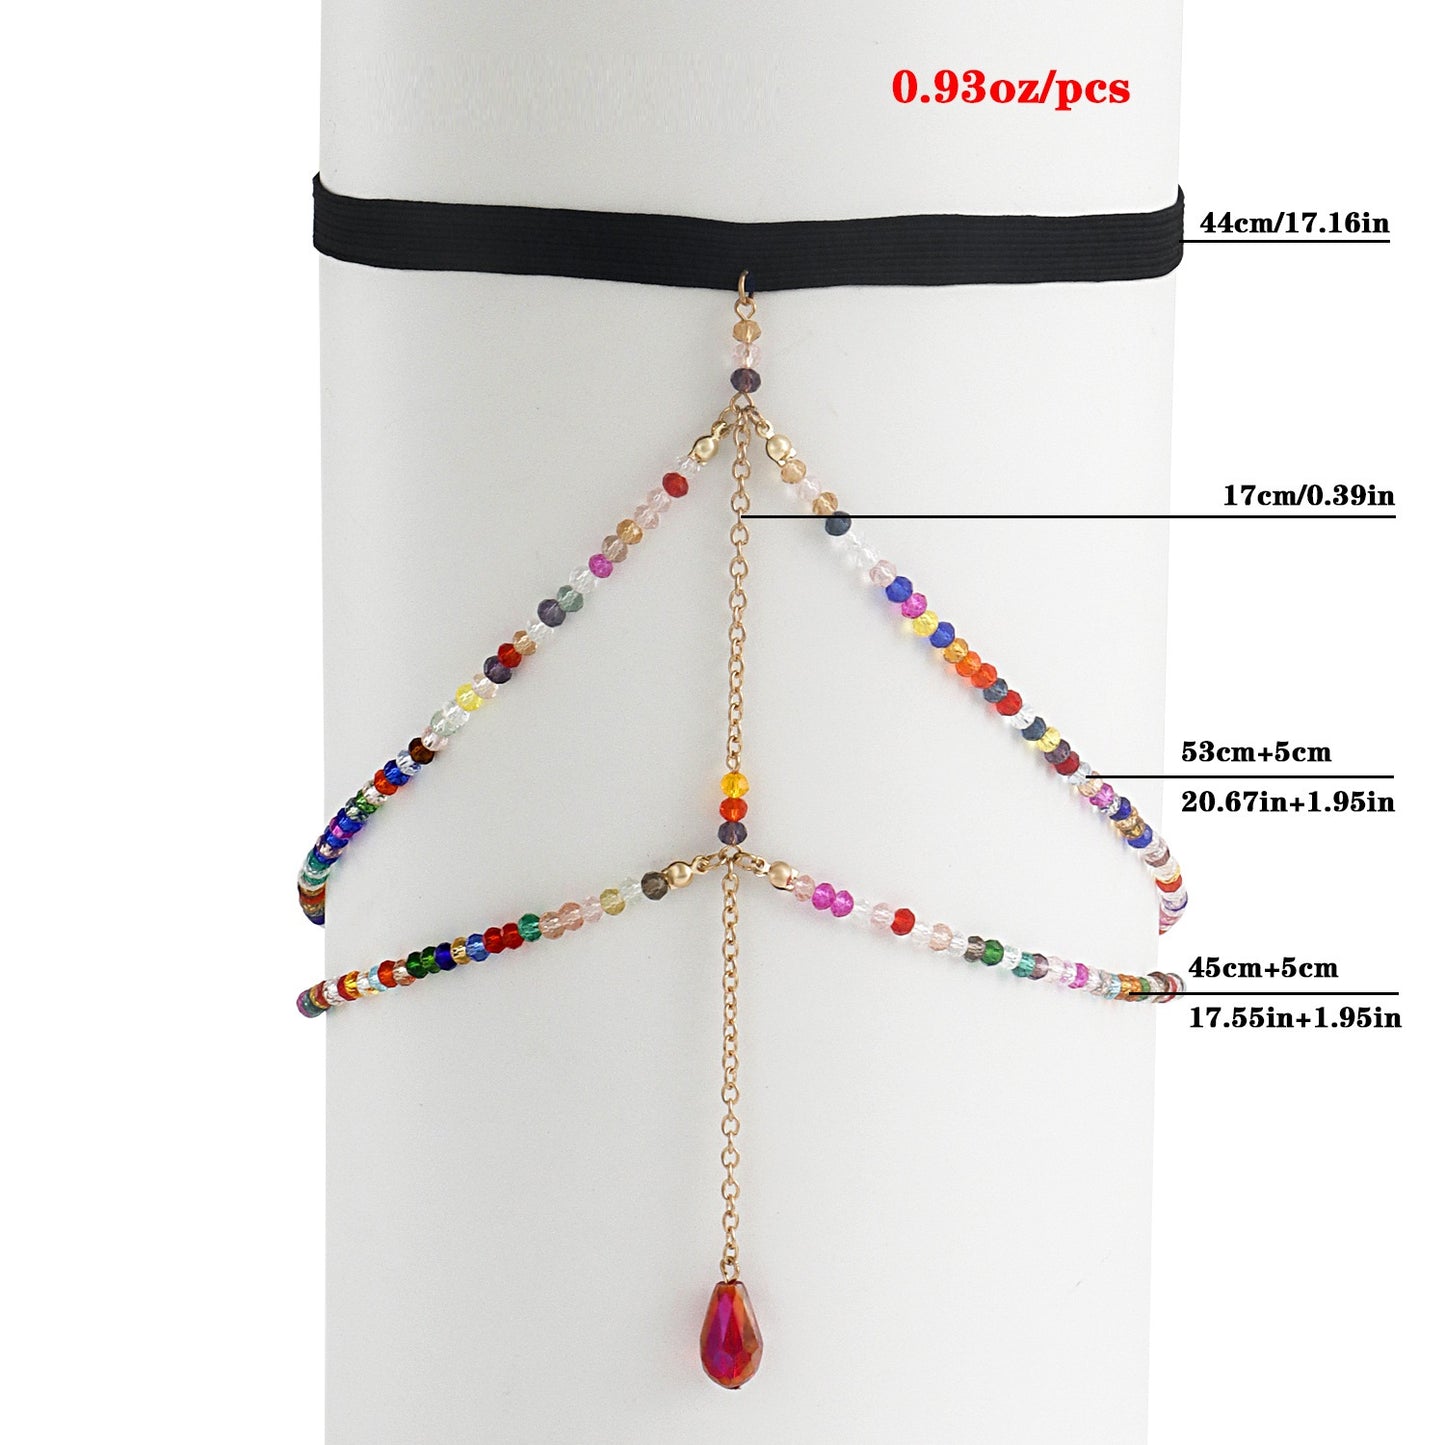 Thigh Ring Colorful Crystal Beads Casual Body Chain